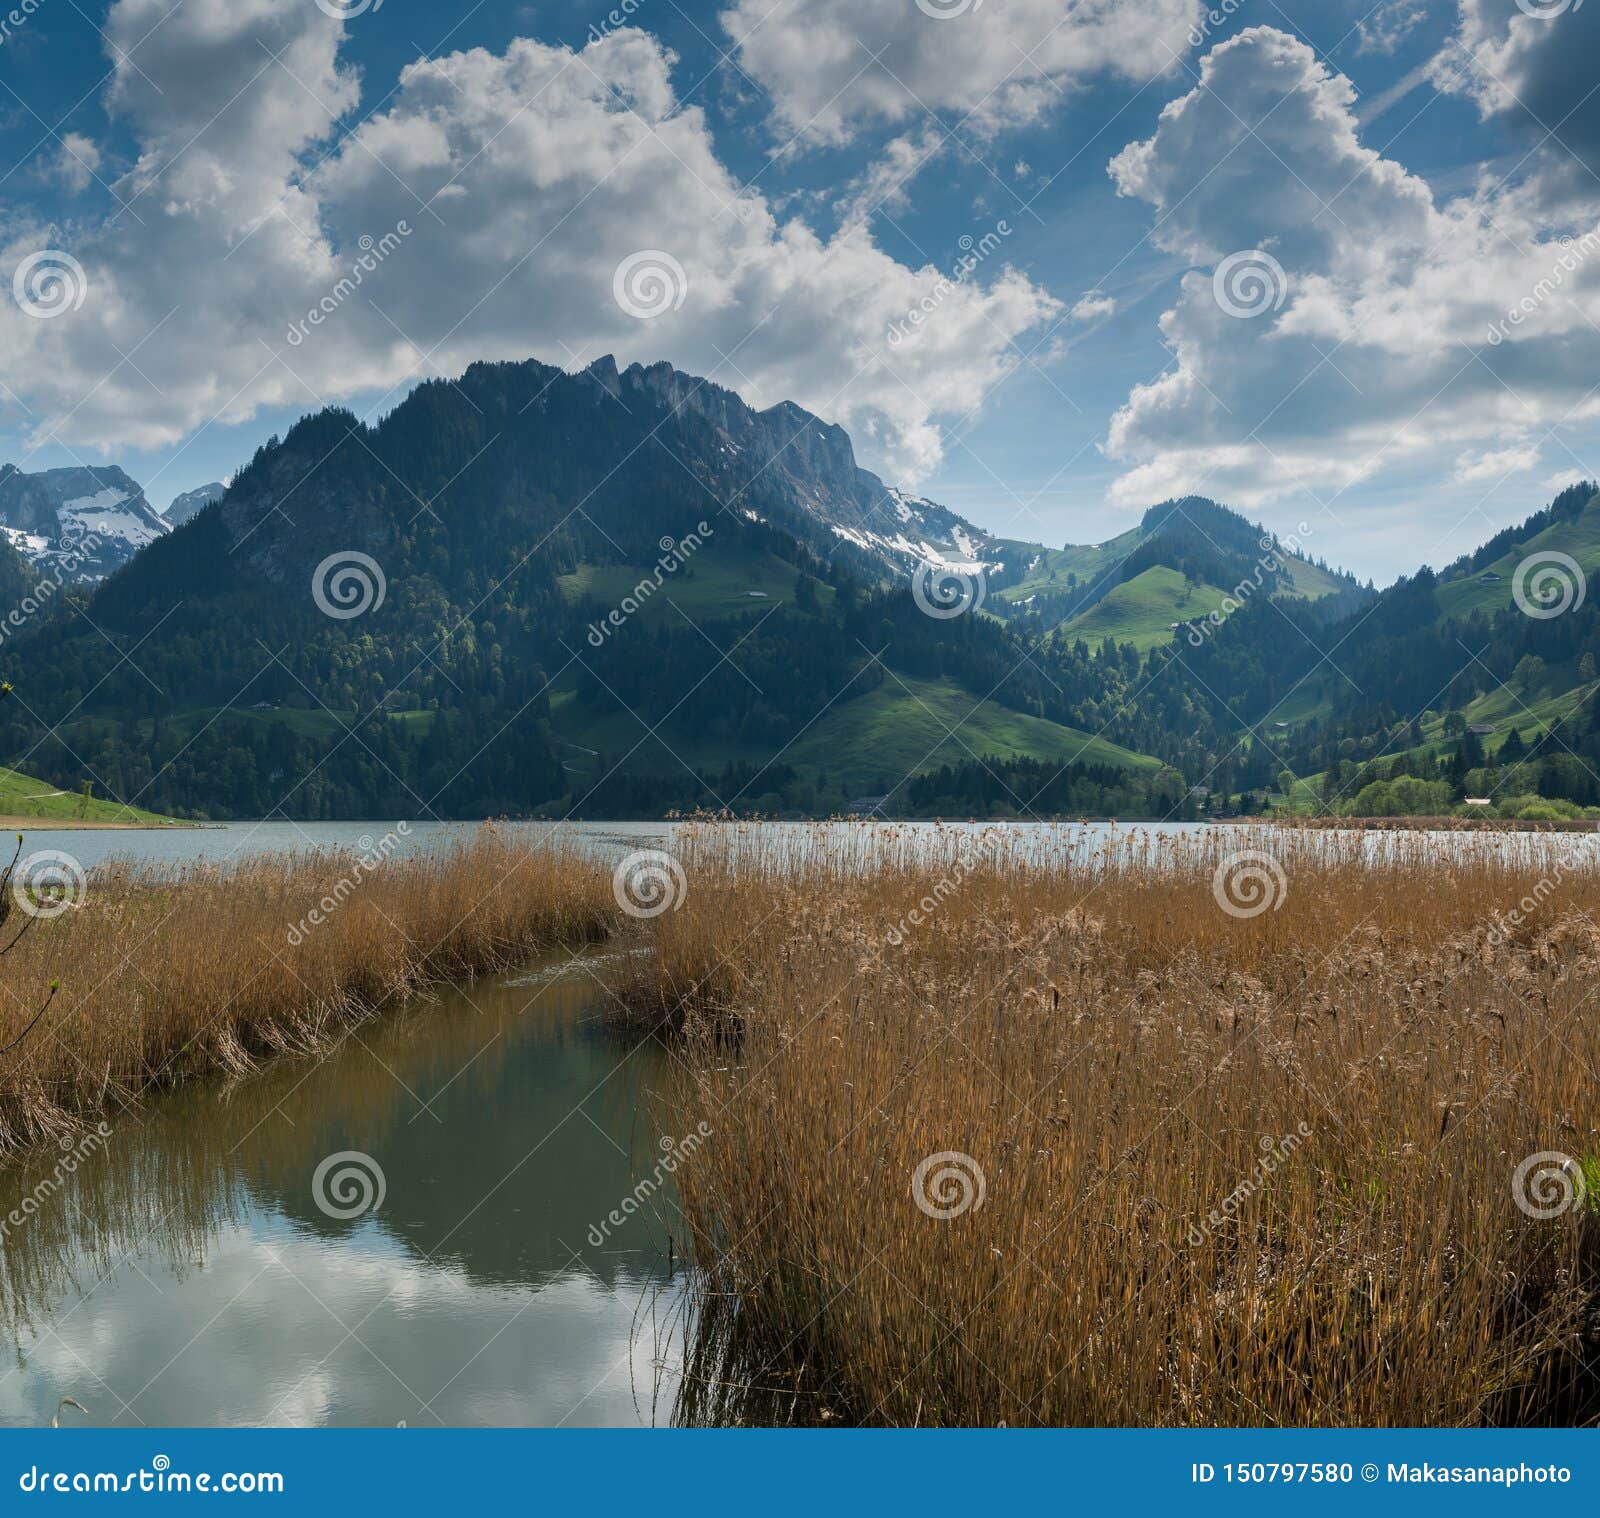 Idyllic Mountain Landscape In The Swiss Alps With A Lake And Golden